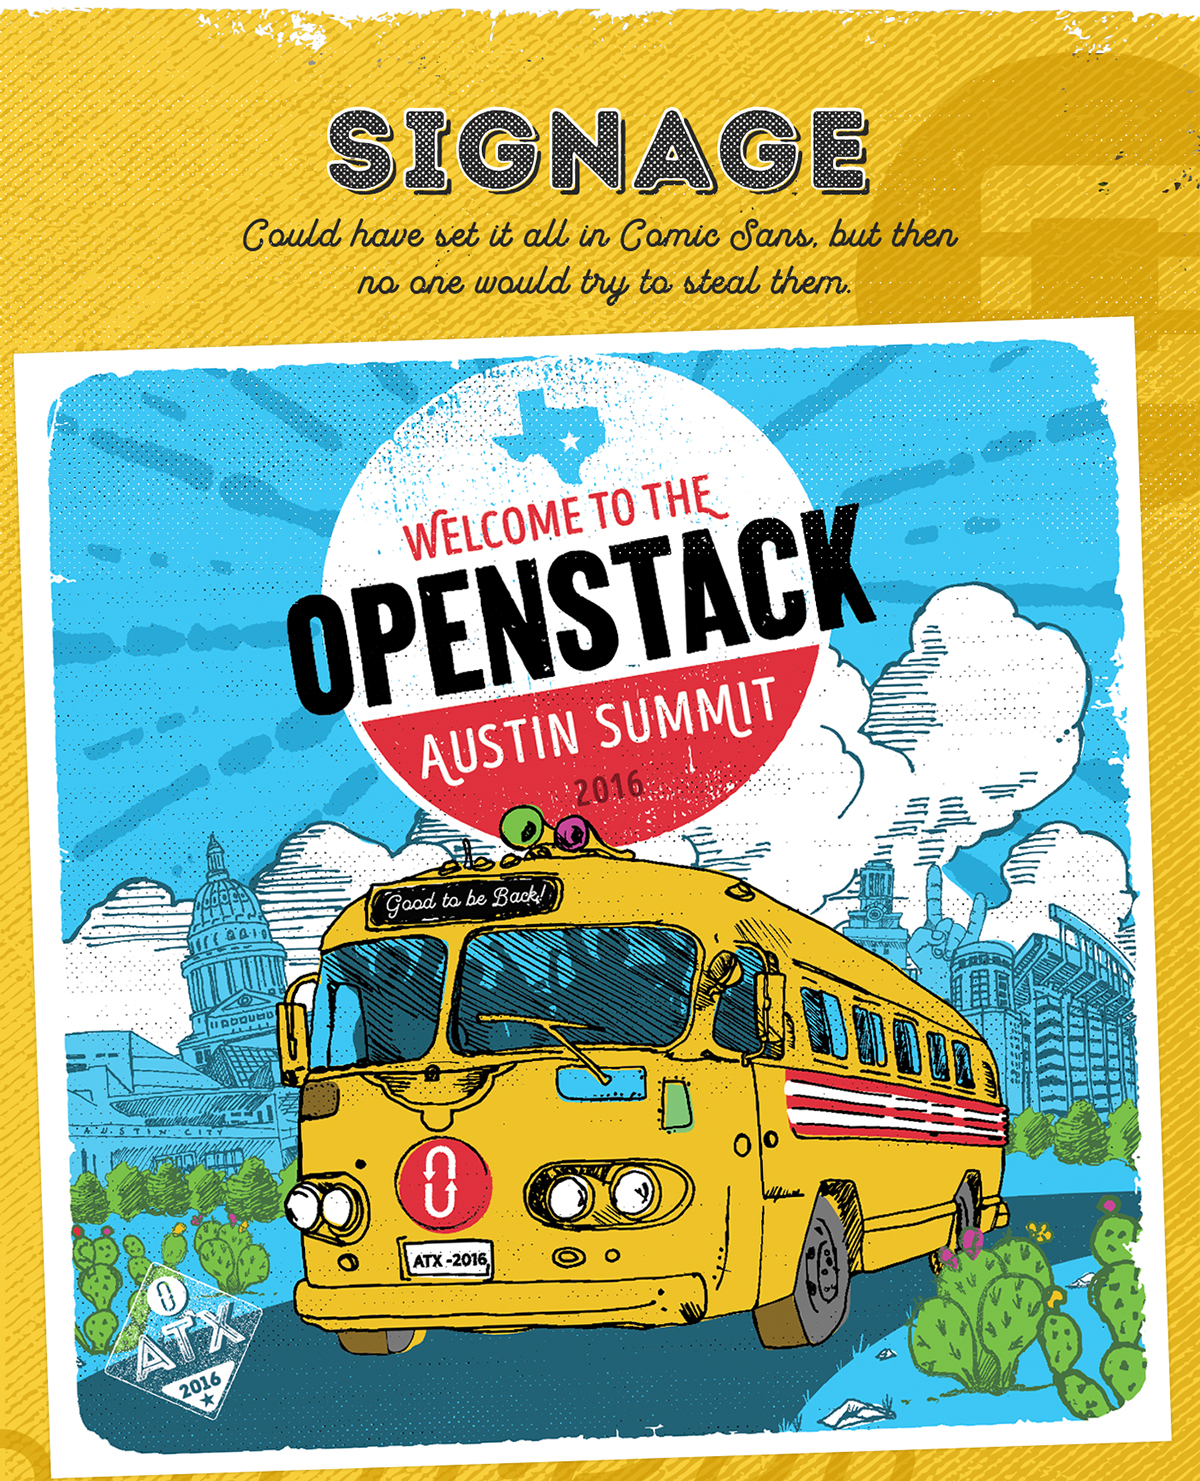 Austin Freelance summit joseph basnight contract openstack type poster conference Signage wayfinding texas graphic SCAD